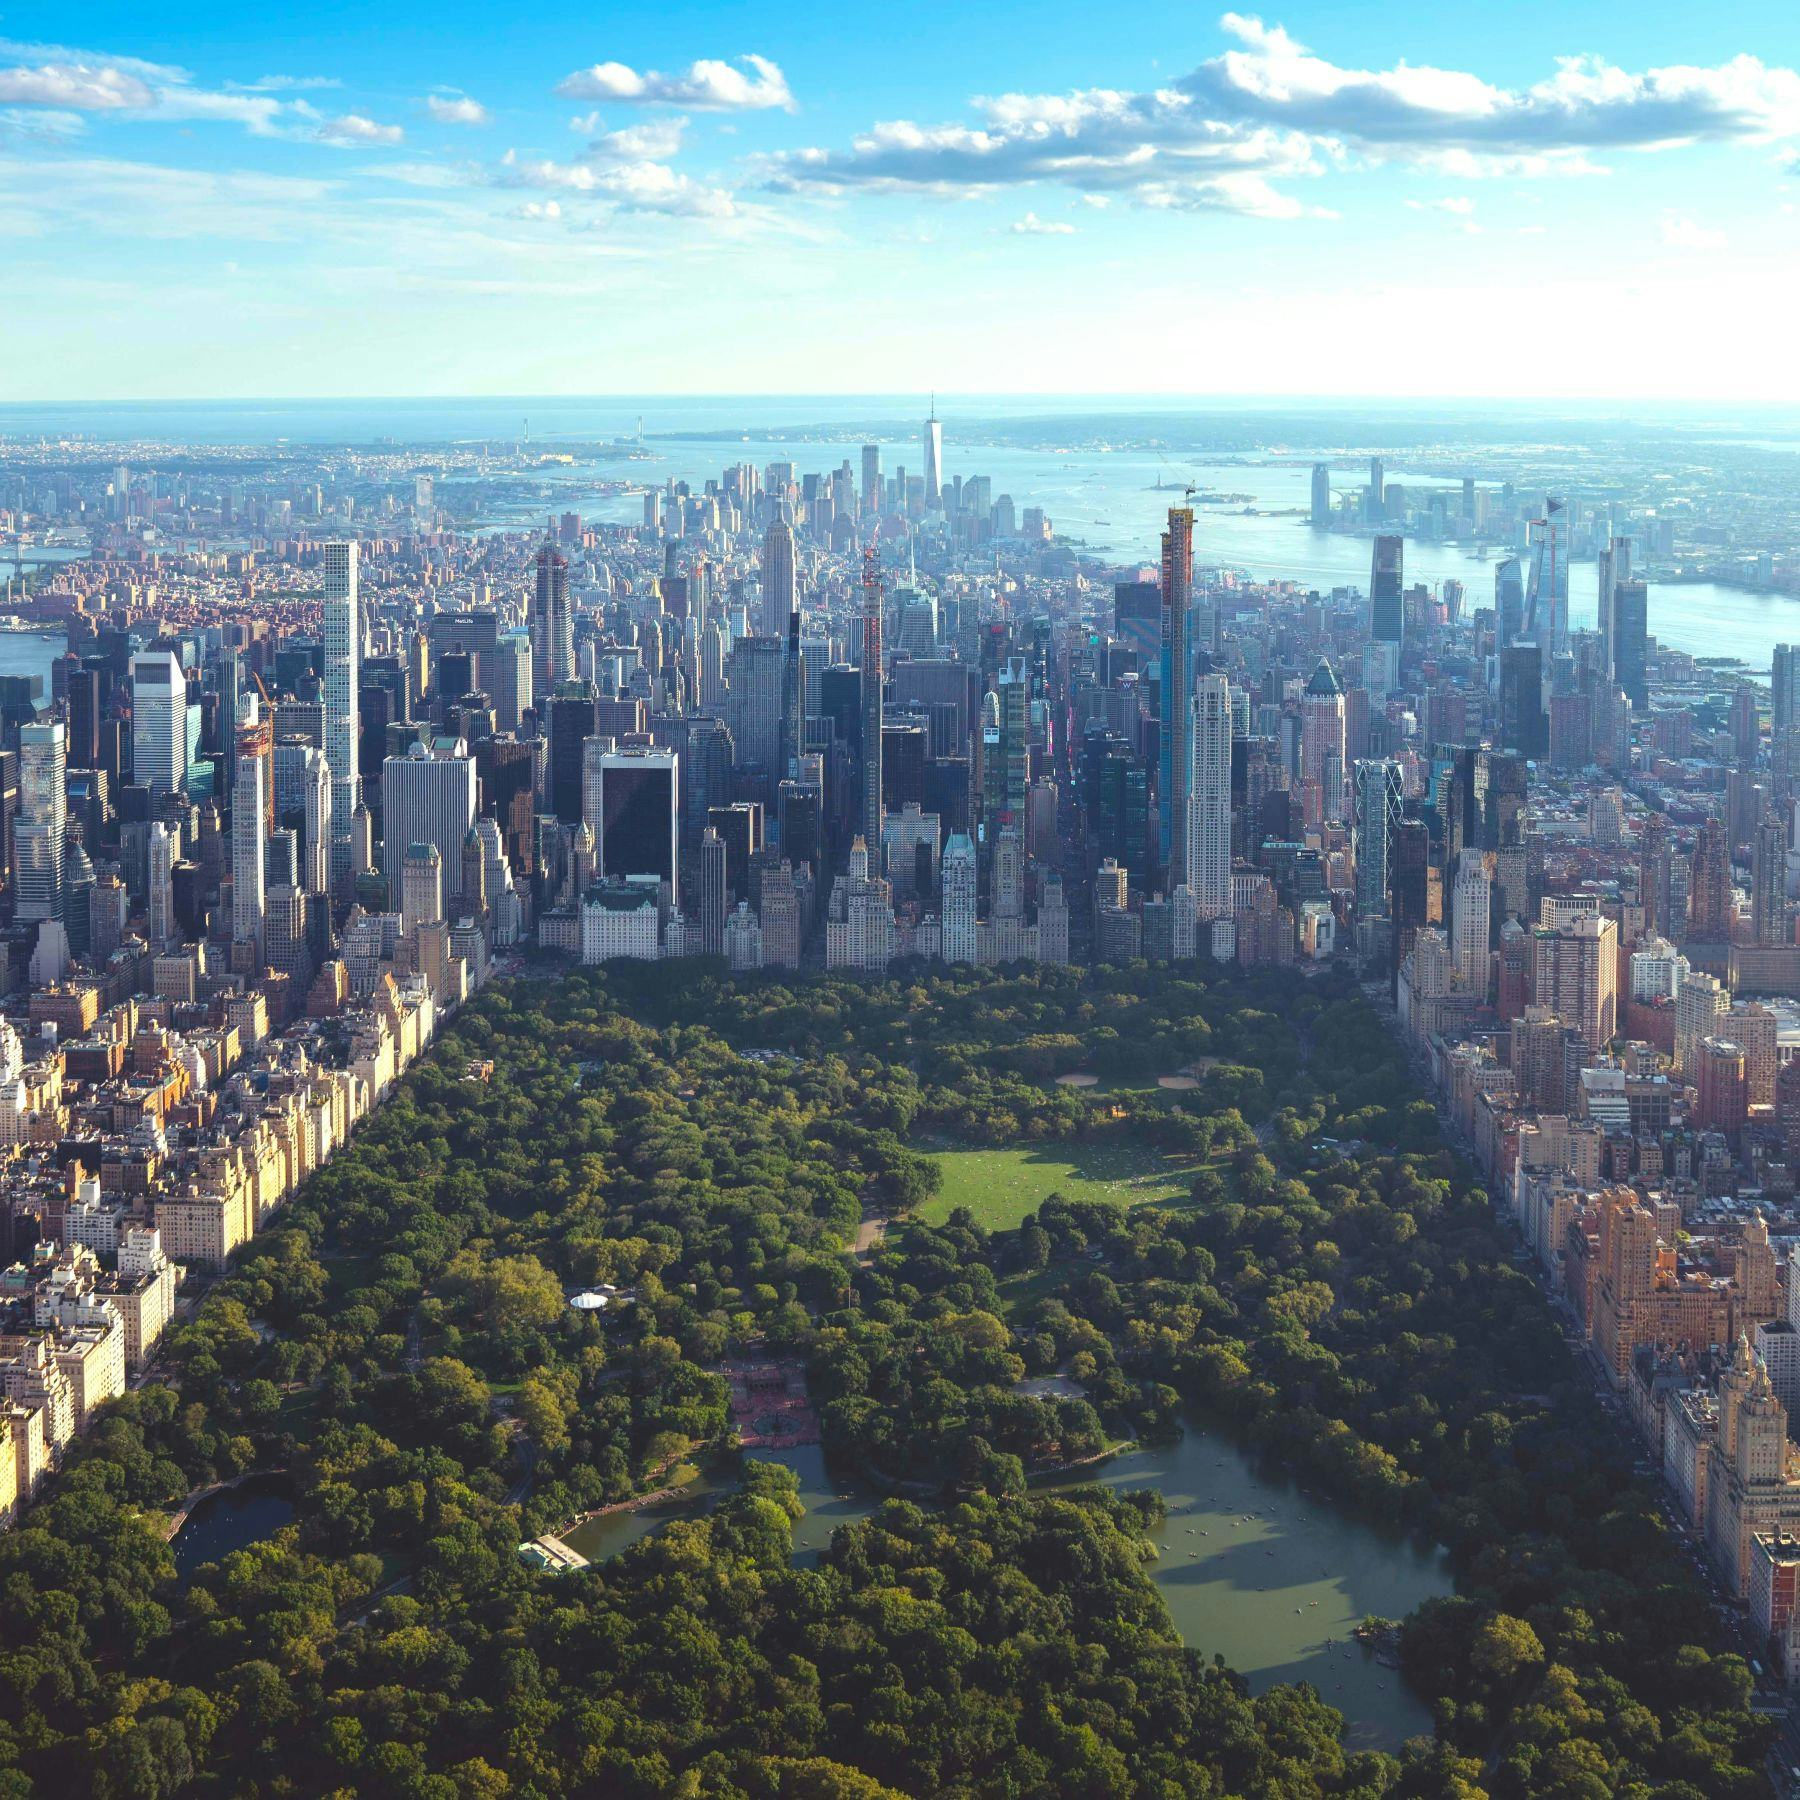 Aerial photo of New York's Central Park and skyscrapers